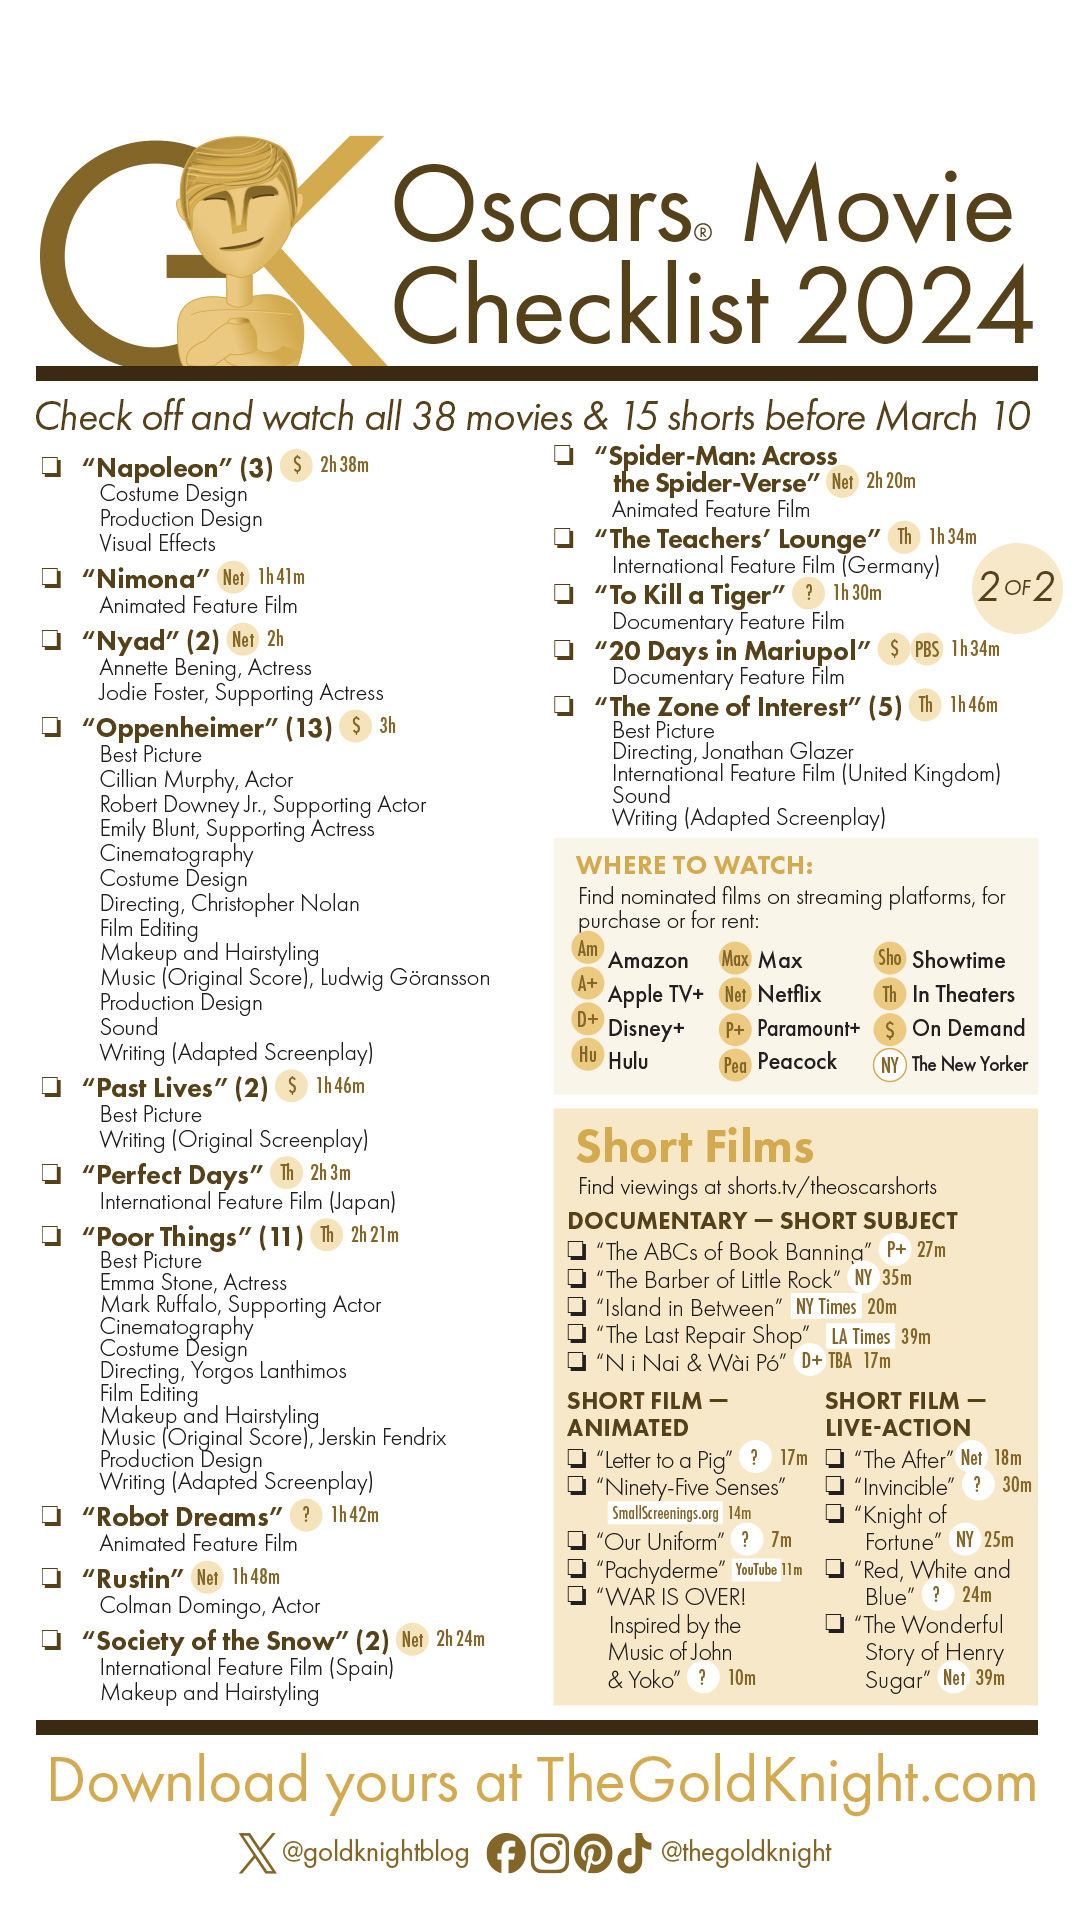 Oscars 2024 Download our printable movie checklist The Gold Knight